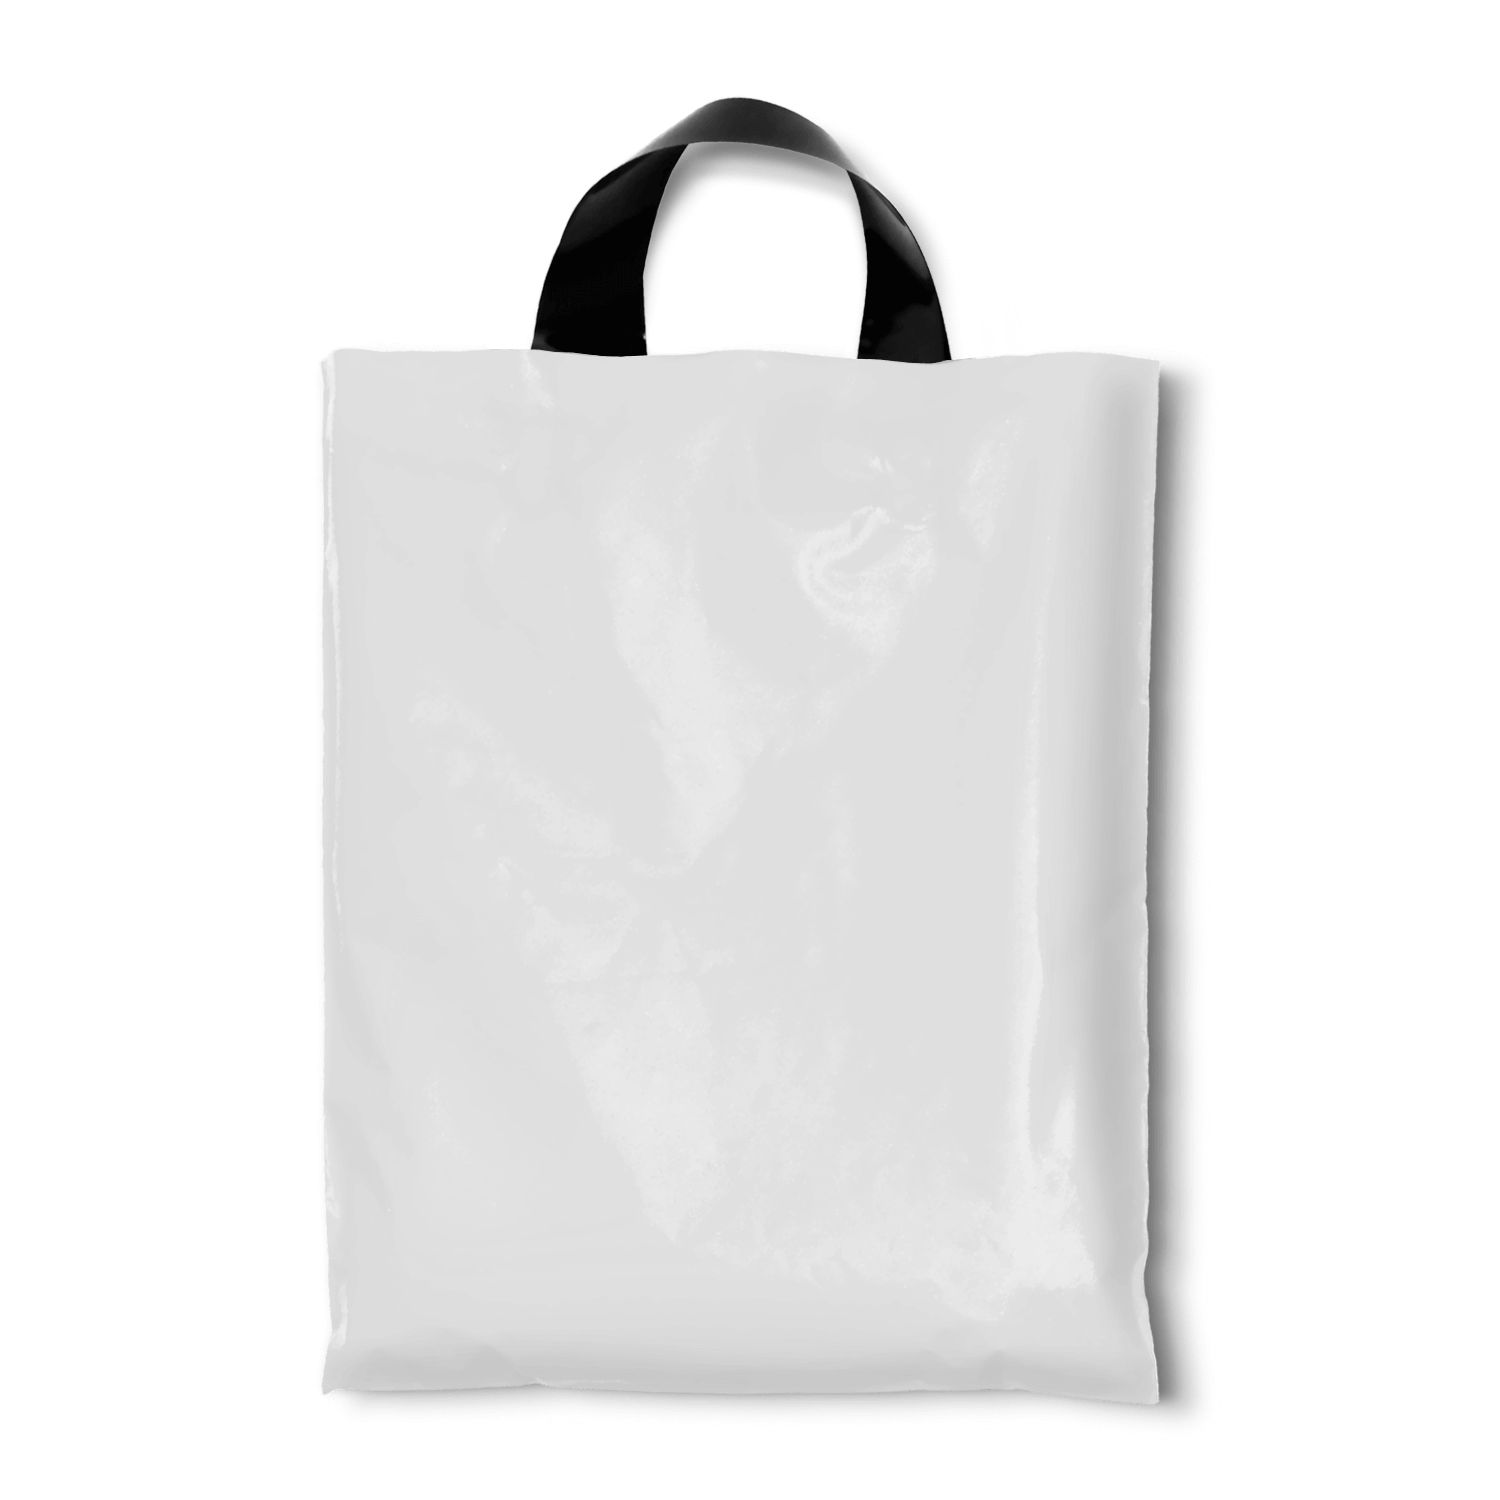 Share more than 76 plastic carry bags designs super hot - in.duhocakina